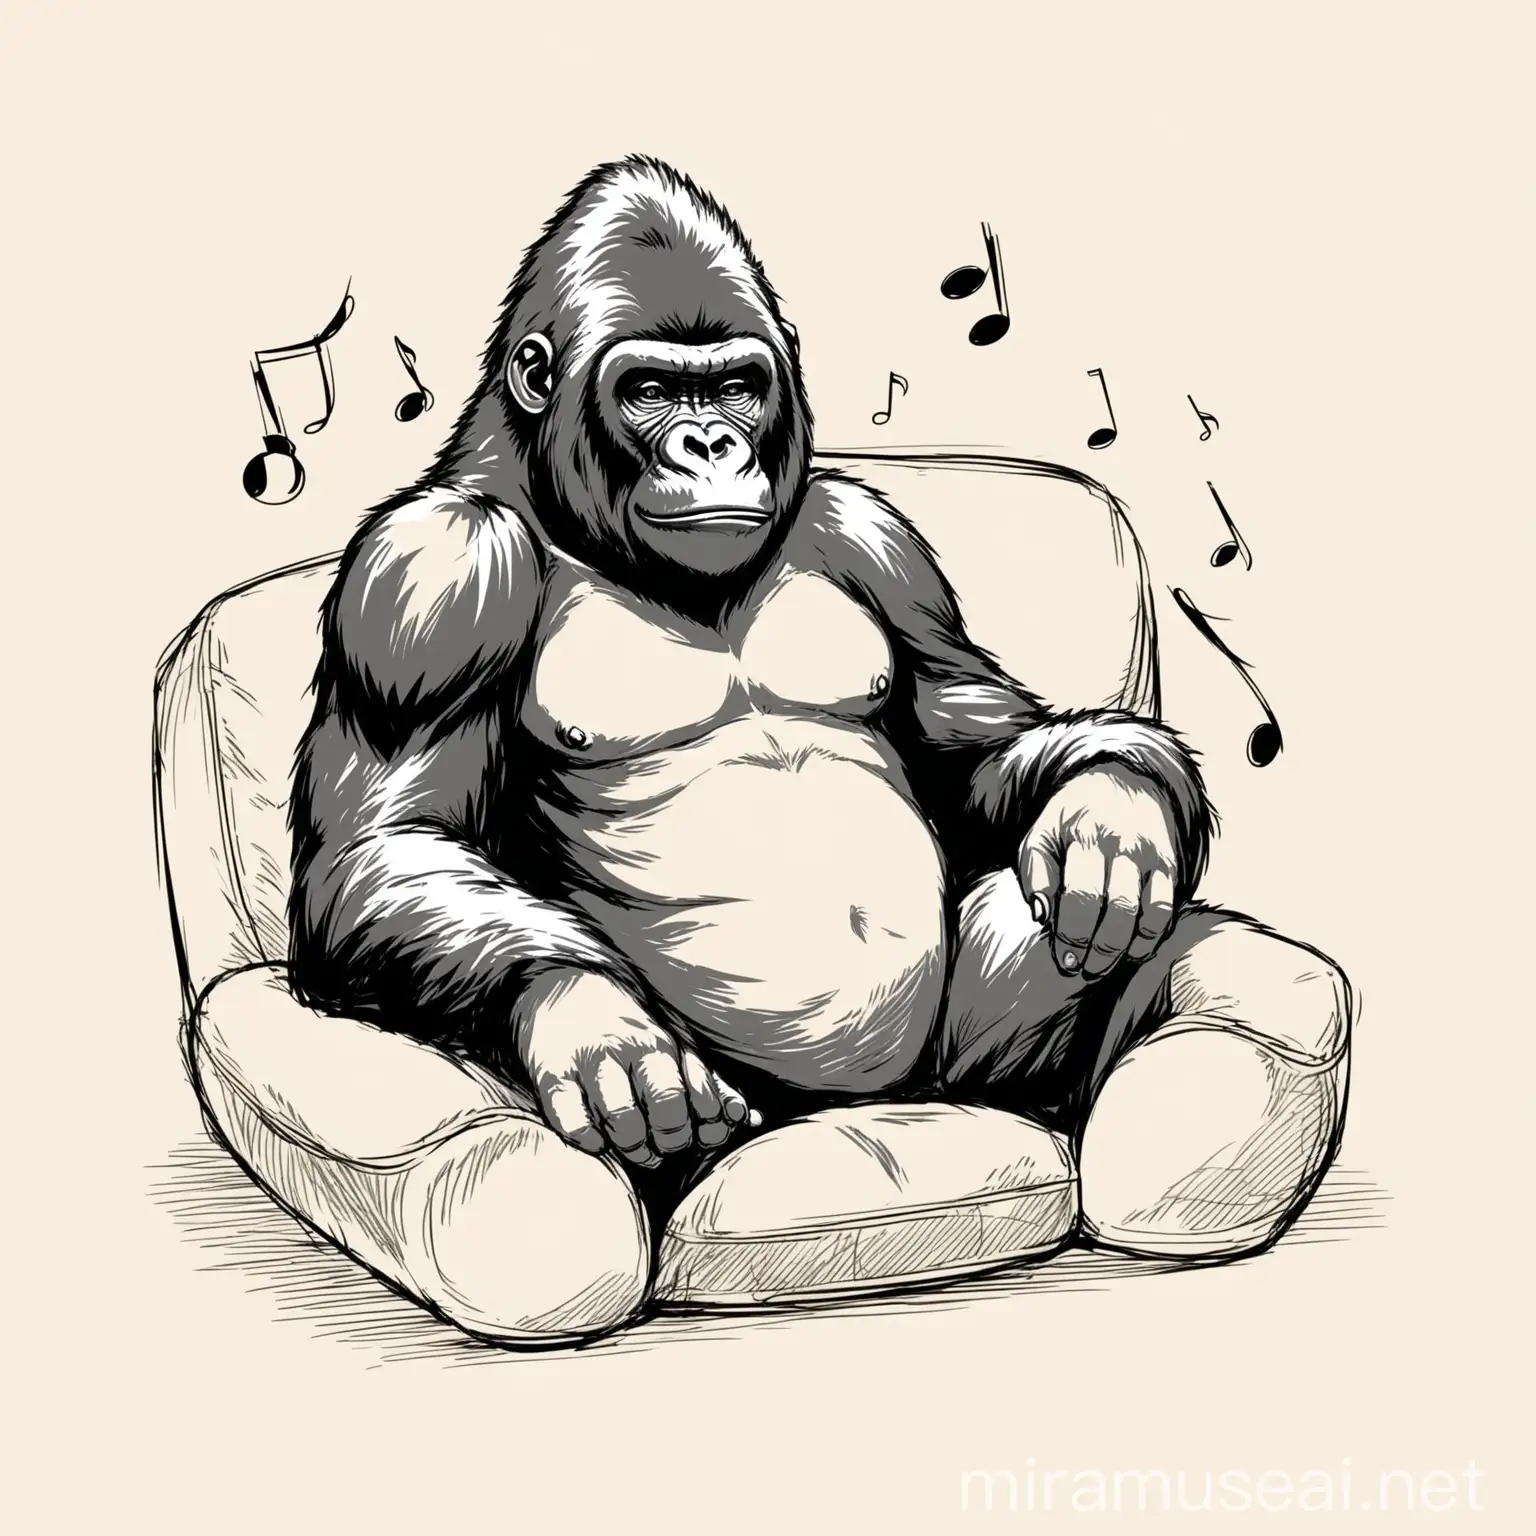 Gorilla chilling with music outline sketch